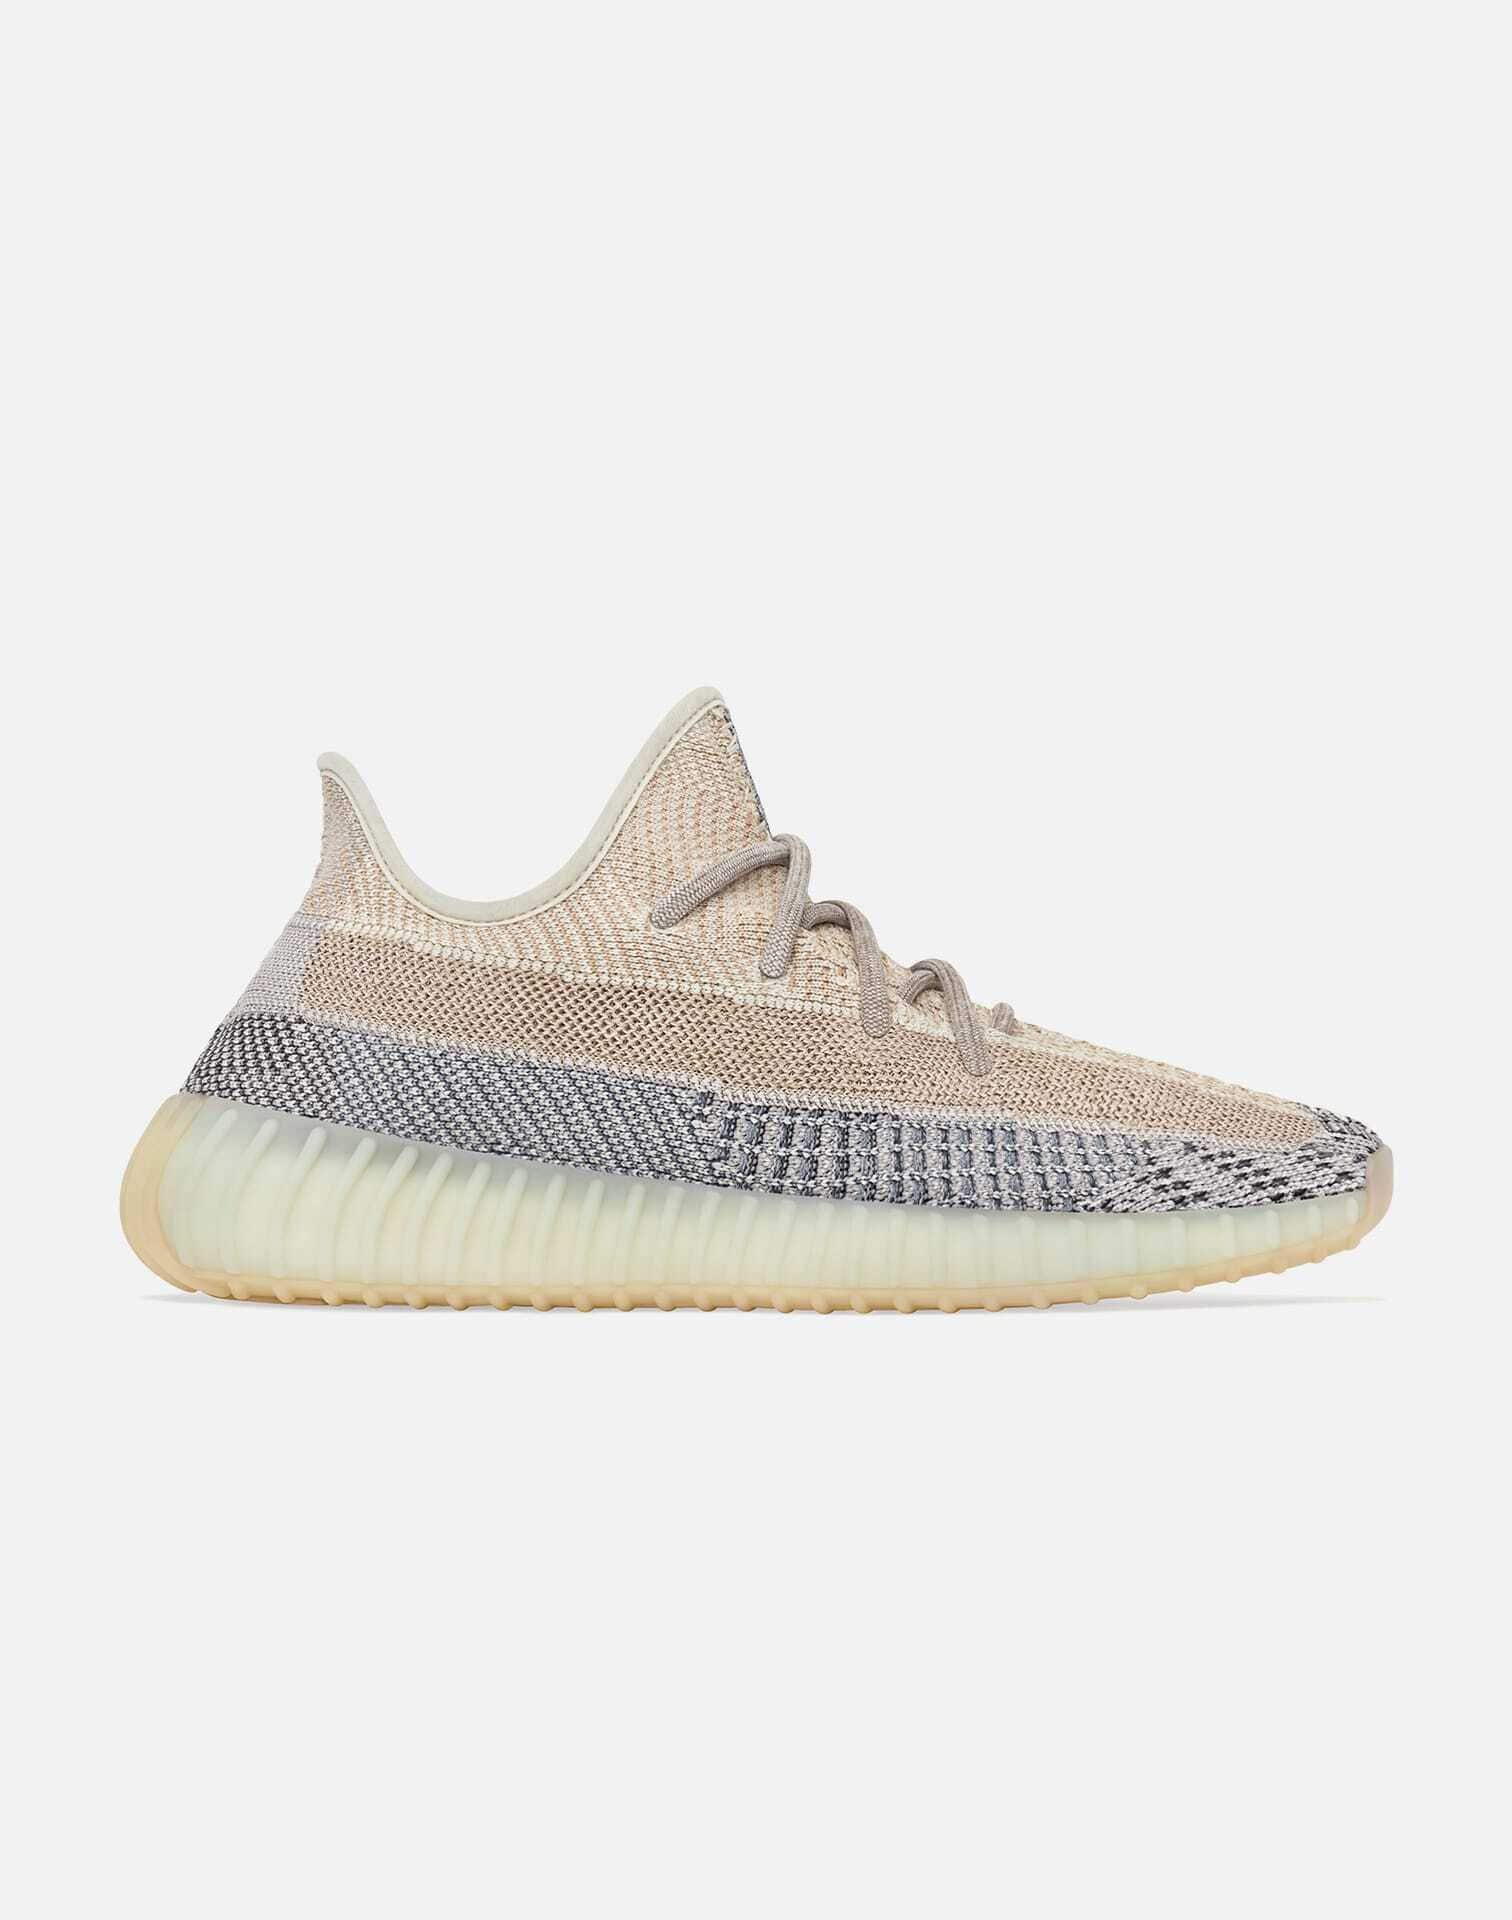 ADIDAS YEEZY BOOST 350 V2 'ASH PEARL' – DTLR